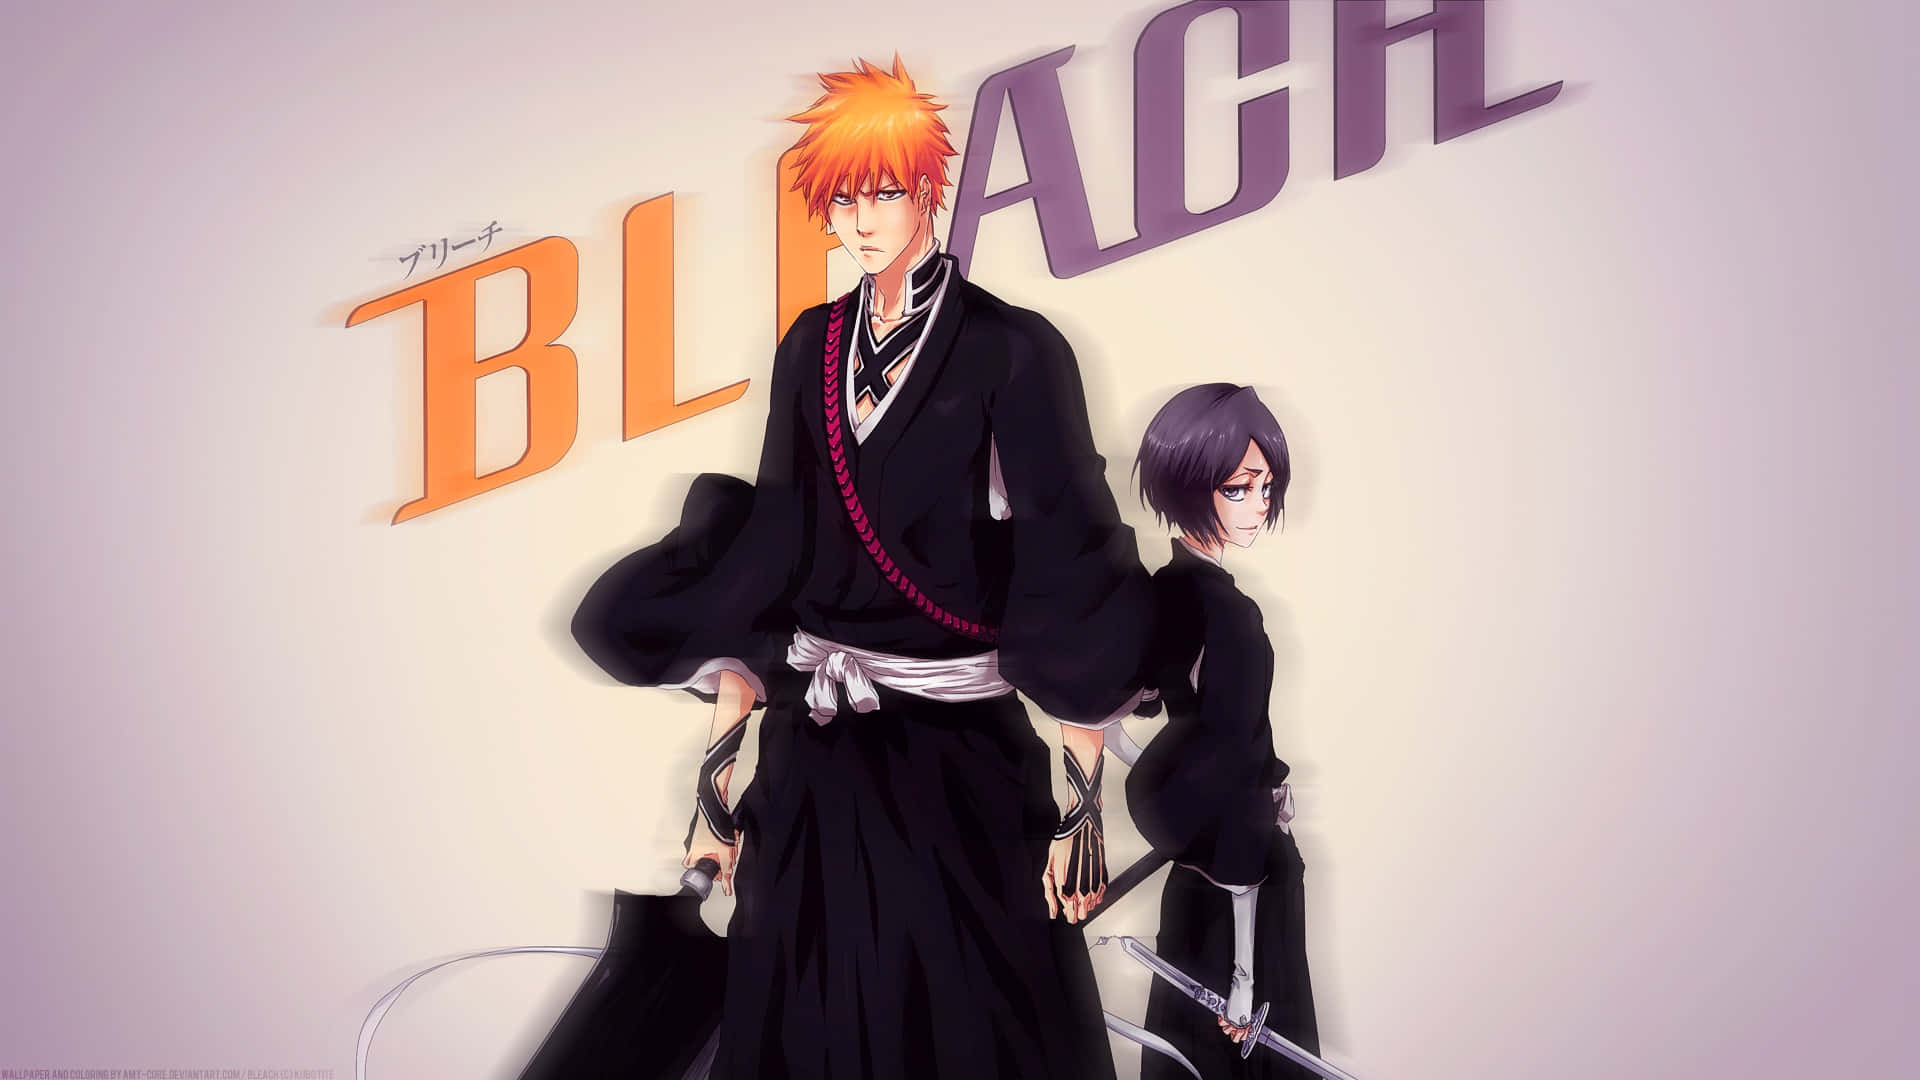 Bleach - A Black Anime Character With A Sword Wallpaper